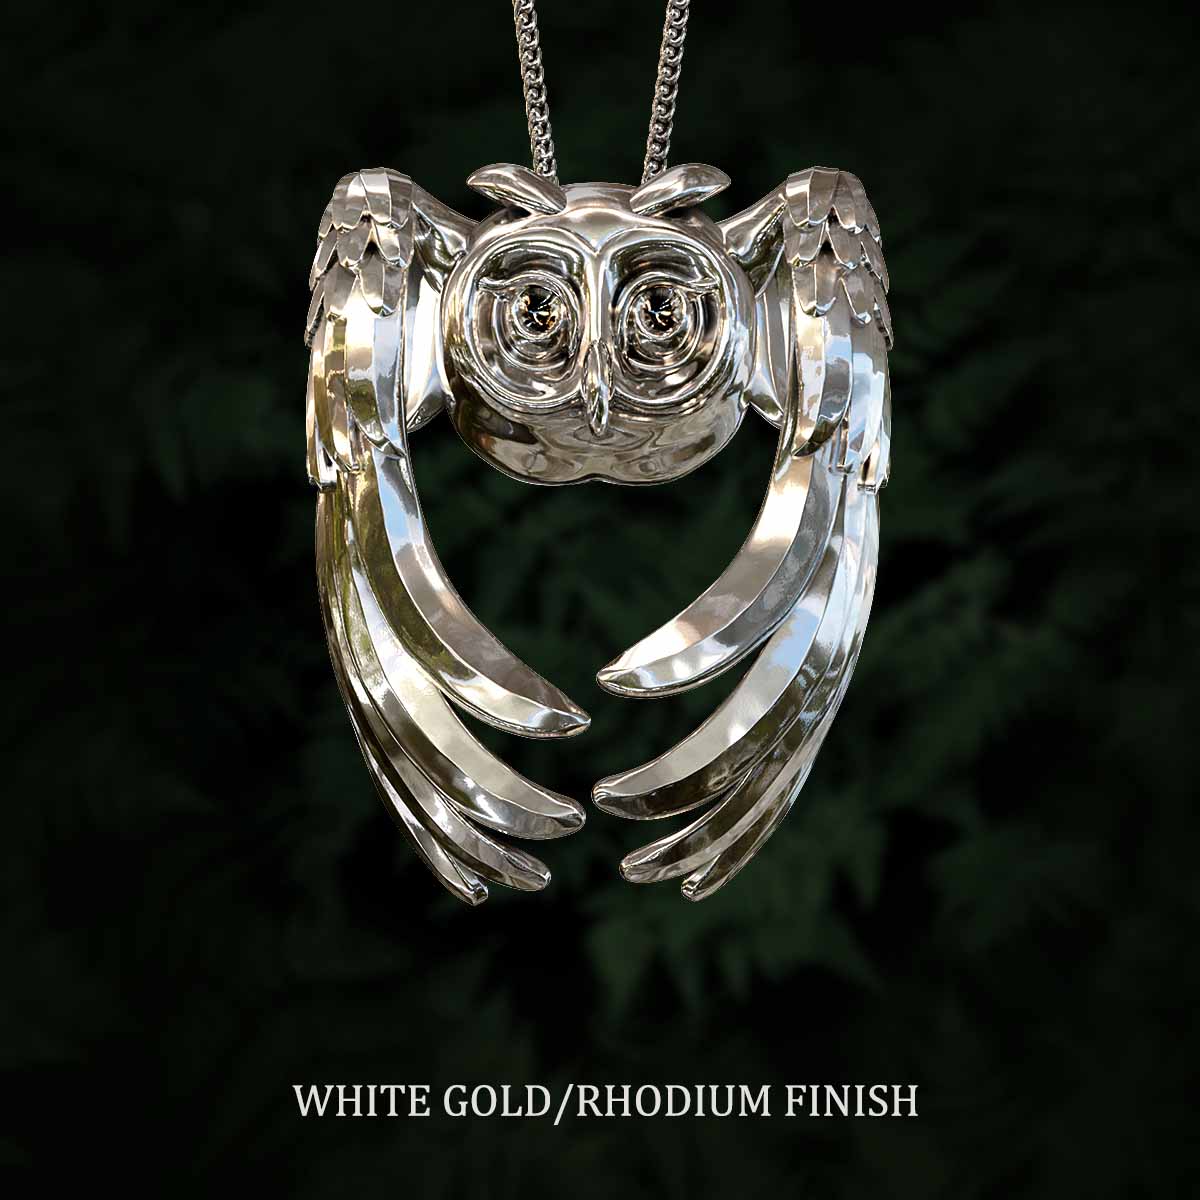 White-Gold-Rhodium-Finish-Owl-Pendant-Jewelry-For-Necklace